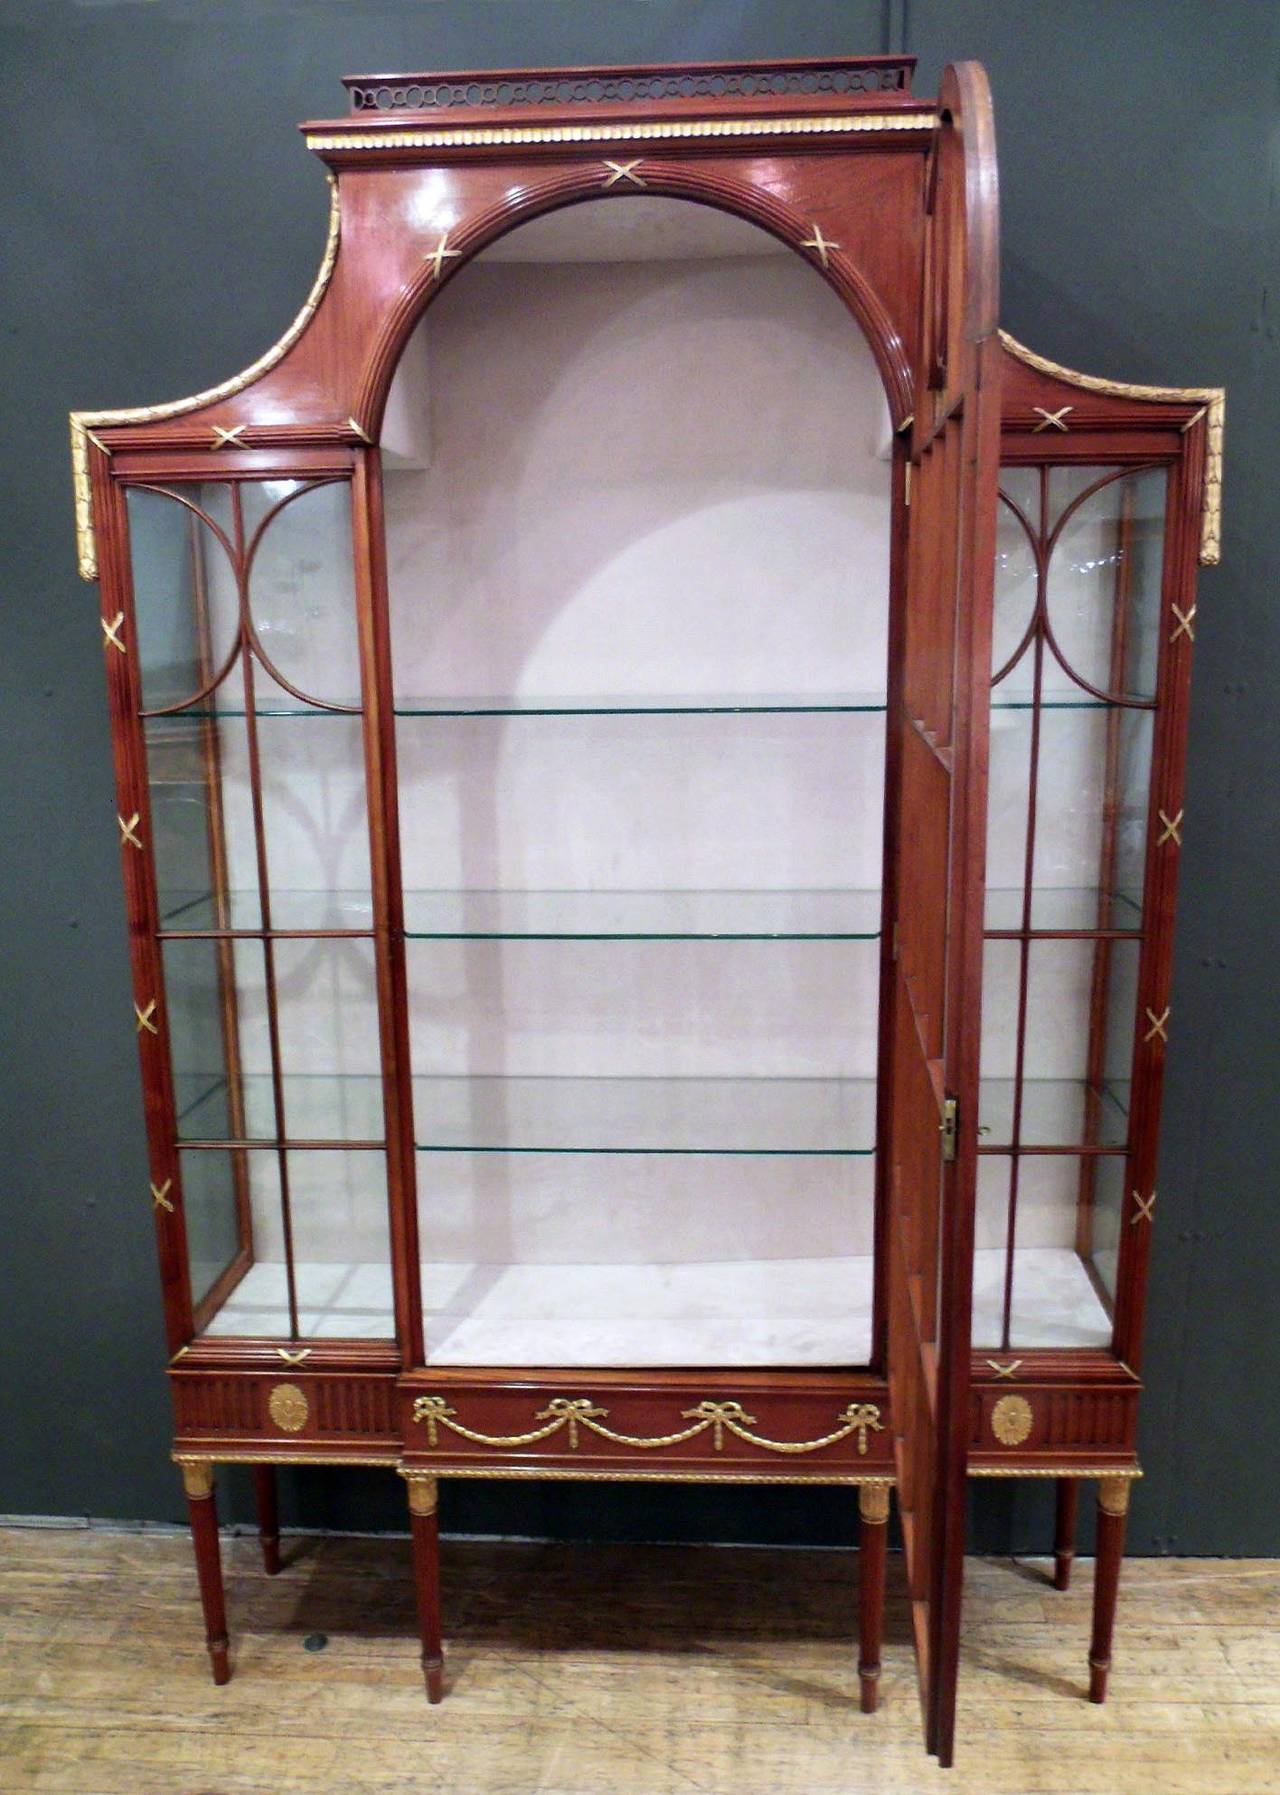 This Edwardian satinwood and parcel-gilt display or China cabinet was made by Maple and Co. of London and stands on six tapered, reeded legs below a breakfront frieze with gilt swag and ribbon decoration. The vitrine features an astragal glazed